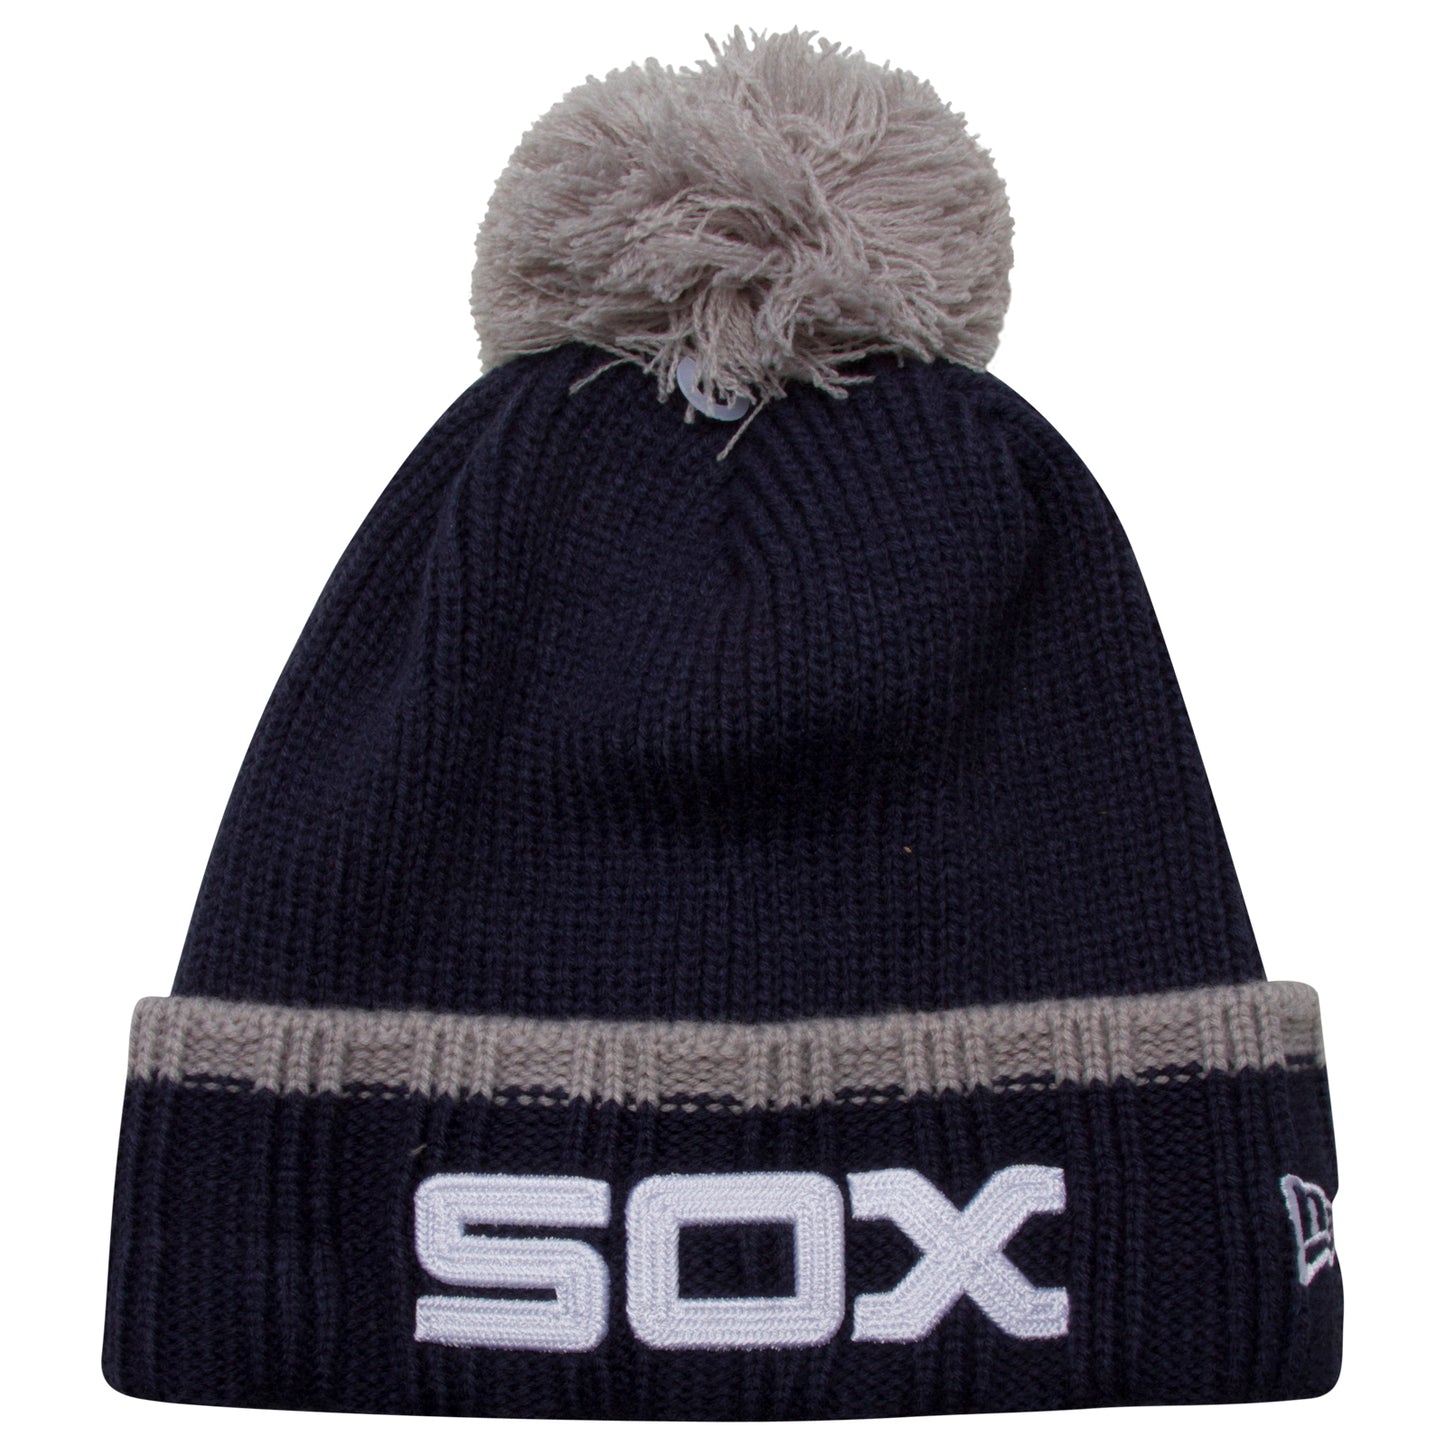 Chicago White Sox Navy and Grey Thick-Stitched Horizontal "Sox" Logo Team Pom Knit Hat